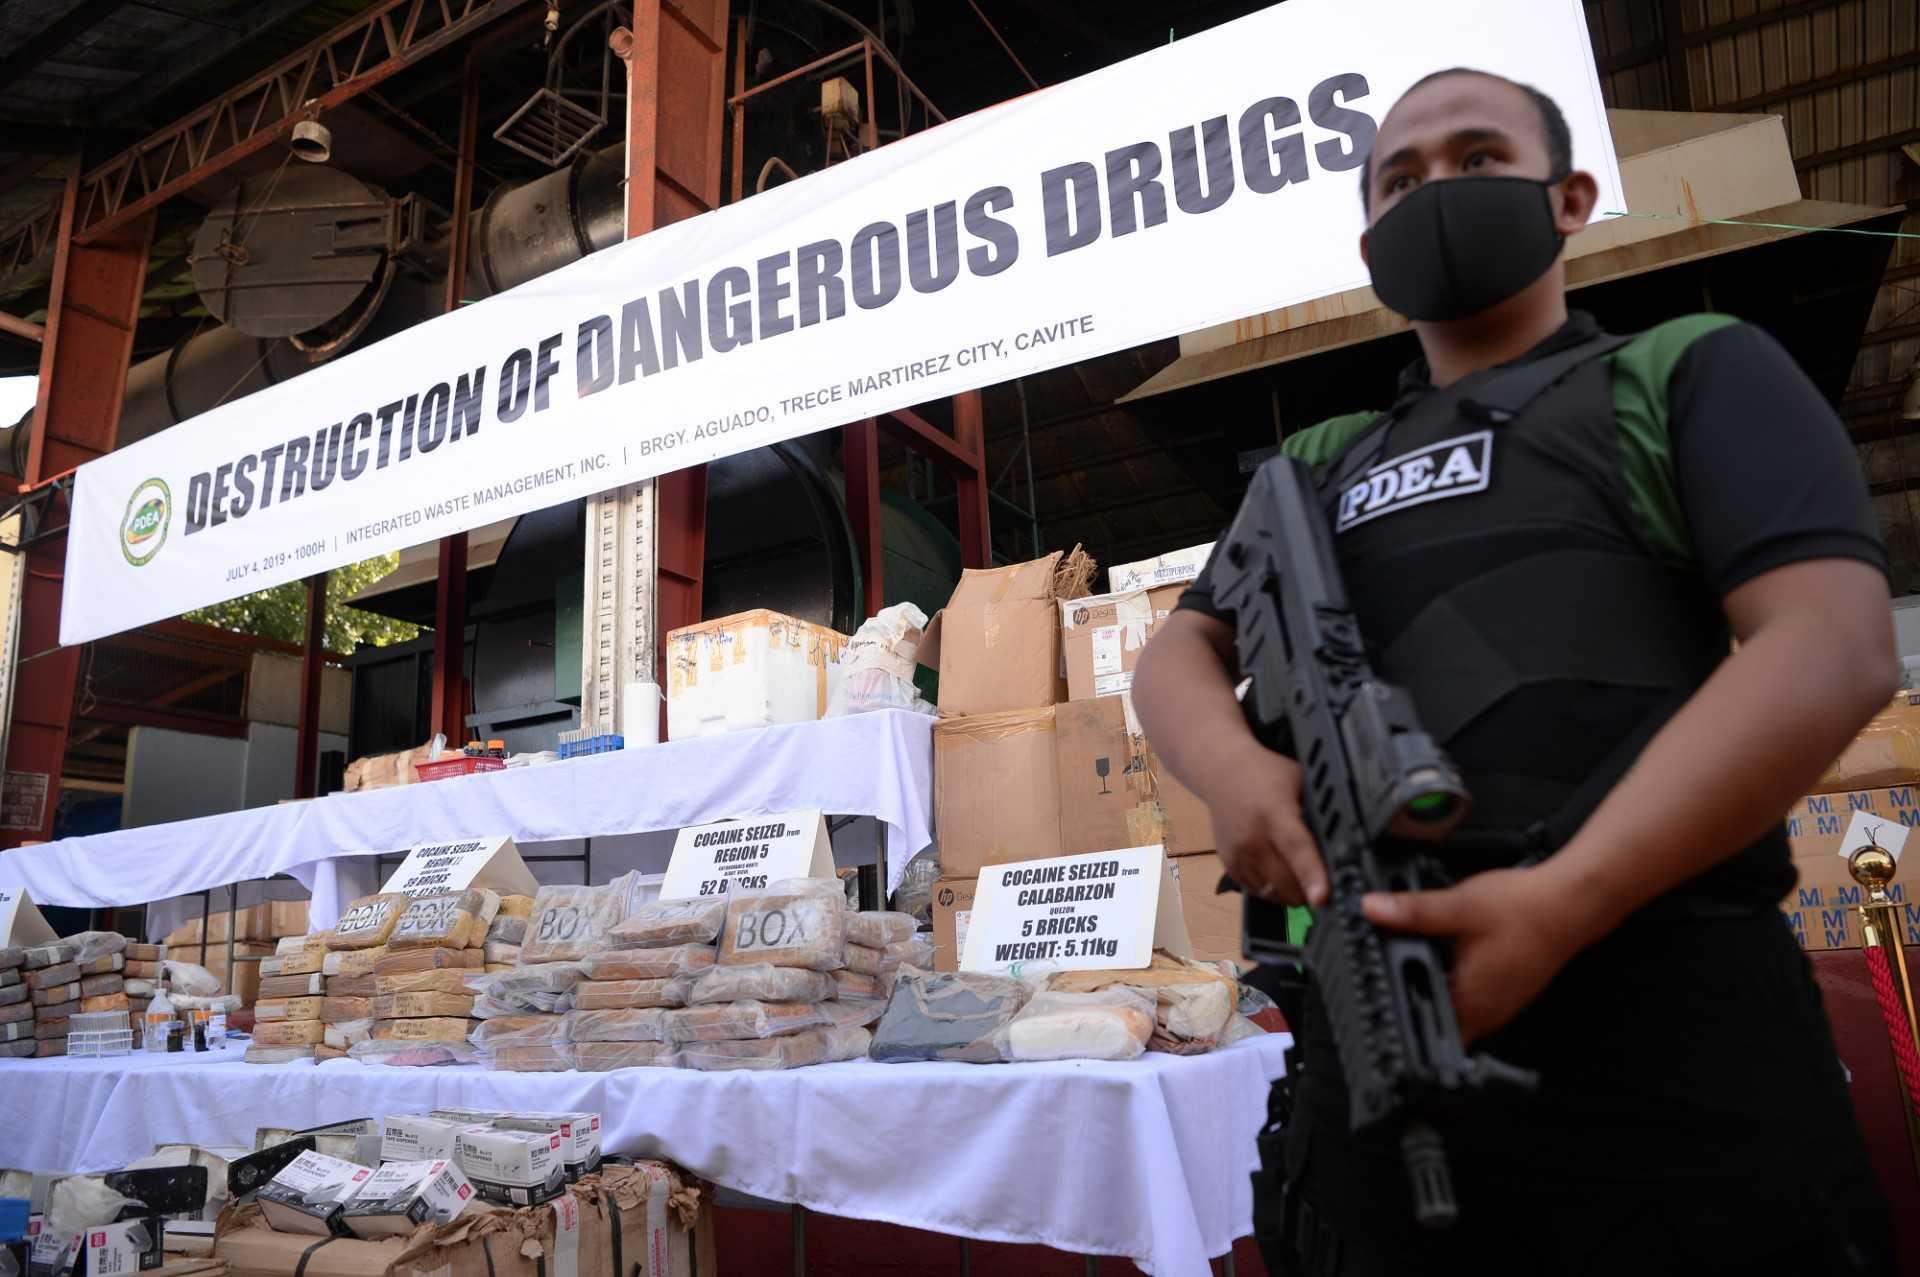 An armed agent of the Philippine Drug Enforcement Agency stands guard next to seized illegal drugs including bricks of cocaine prior to destroying them at a waste facility in Trece Martires, Cavite province on July 4, 2019. Photo: AFP 